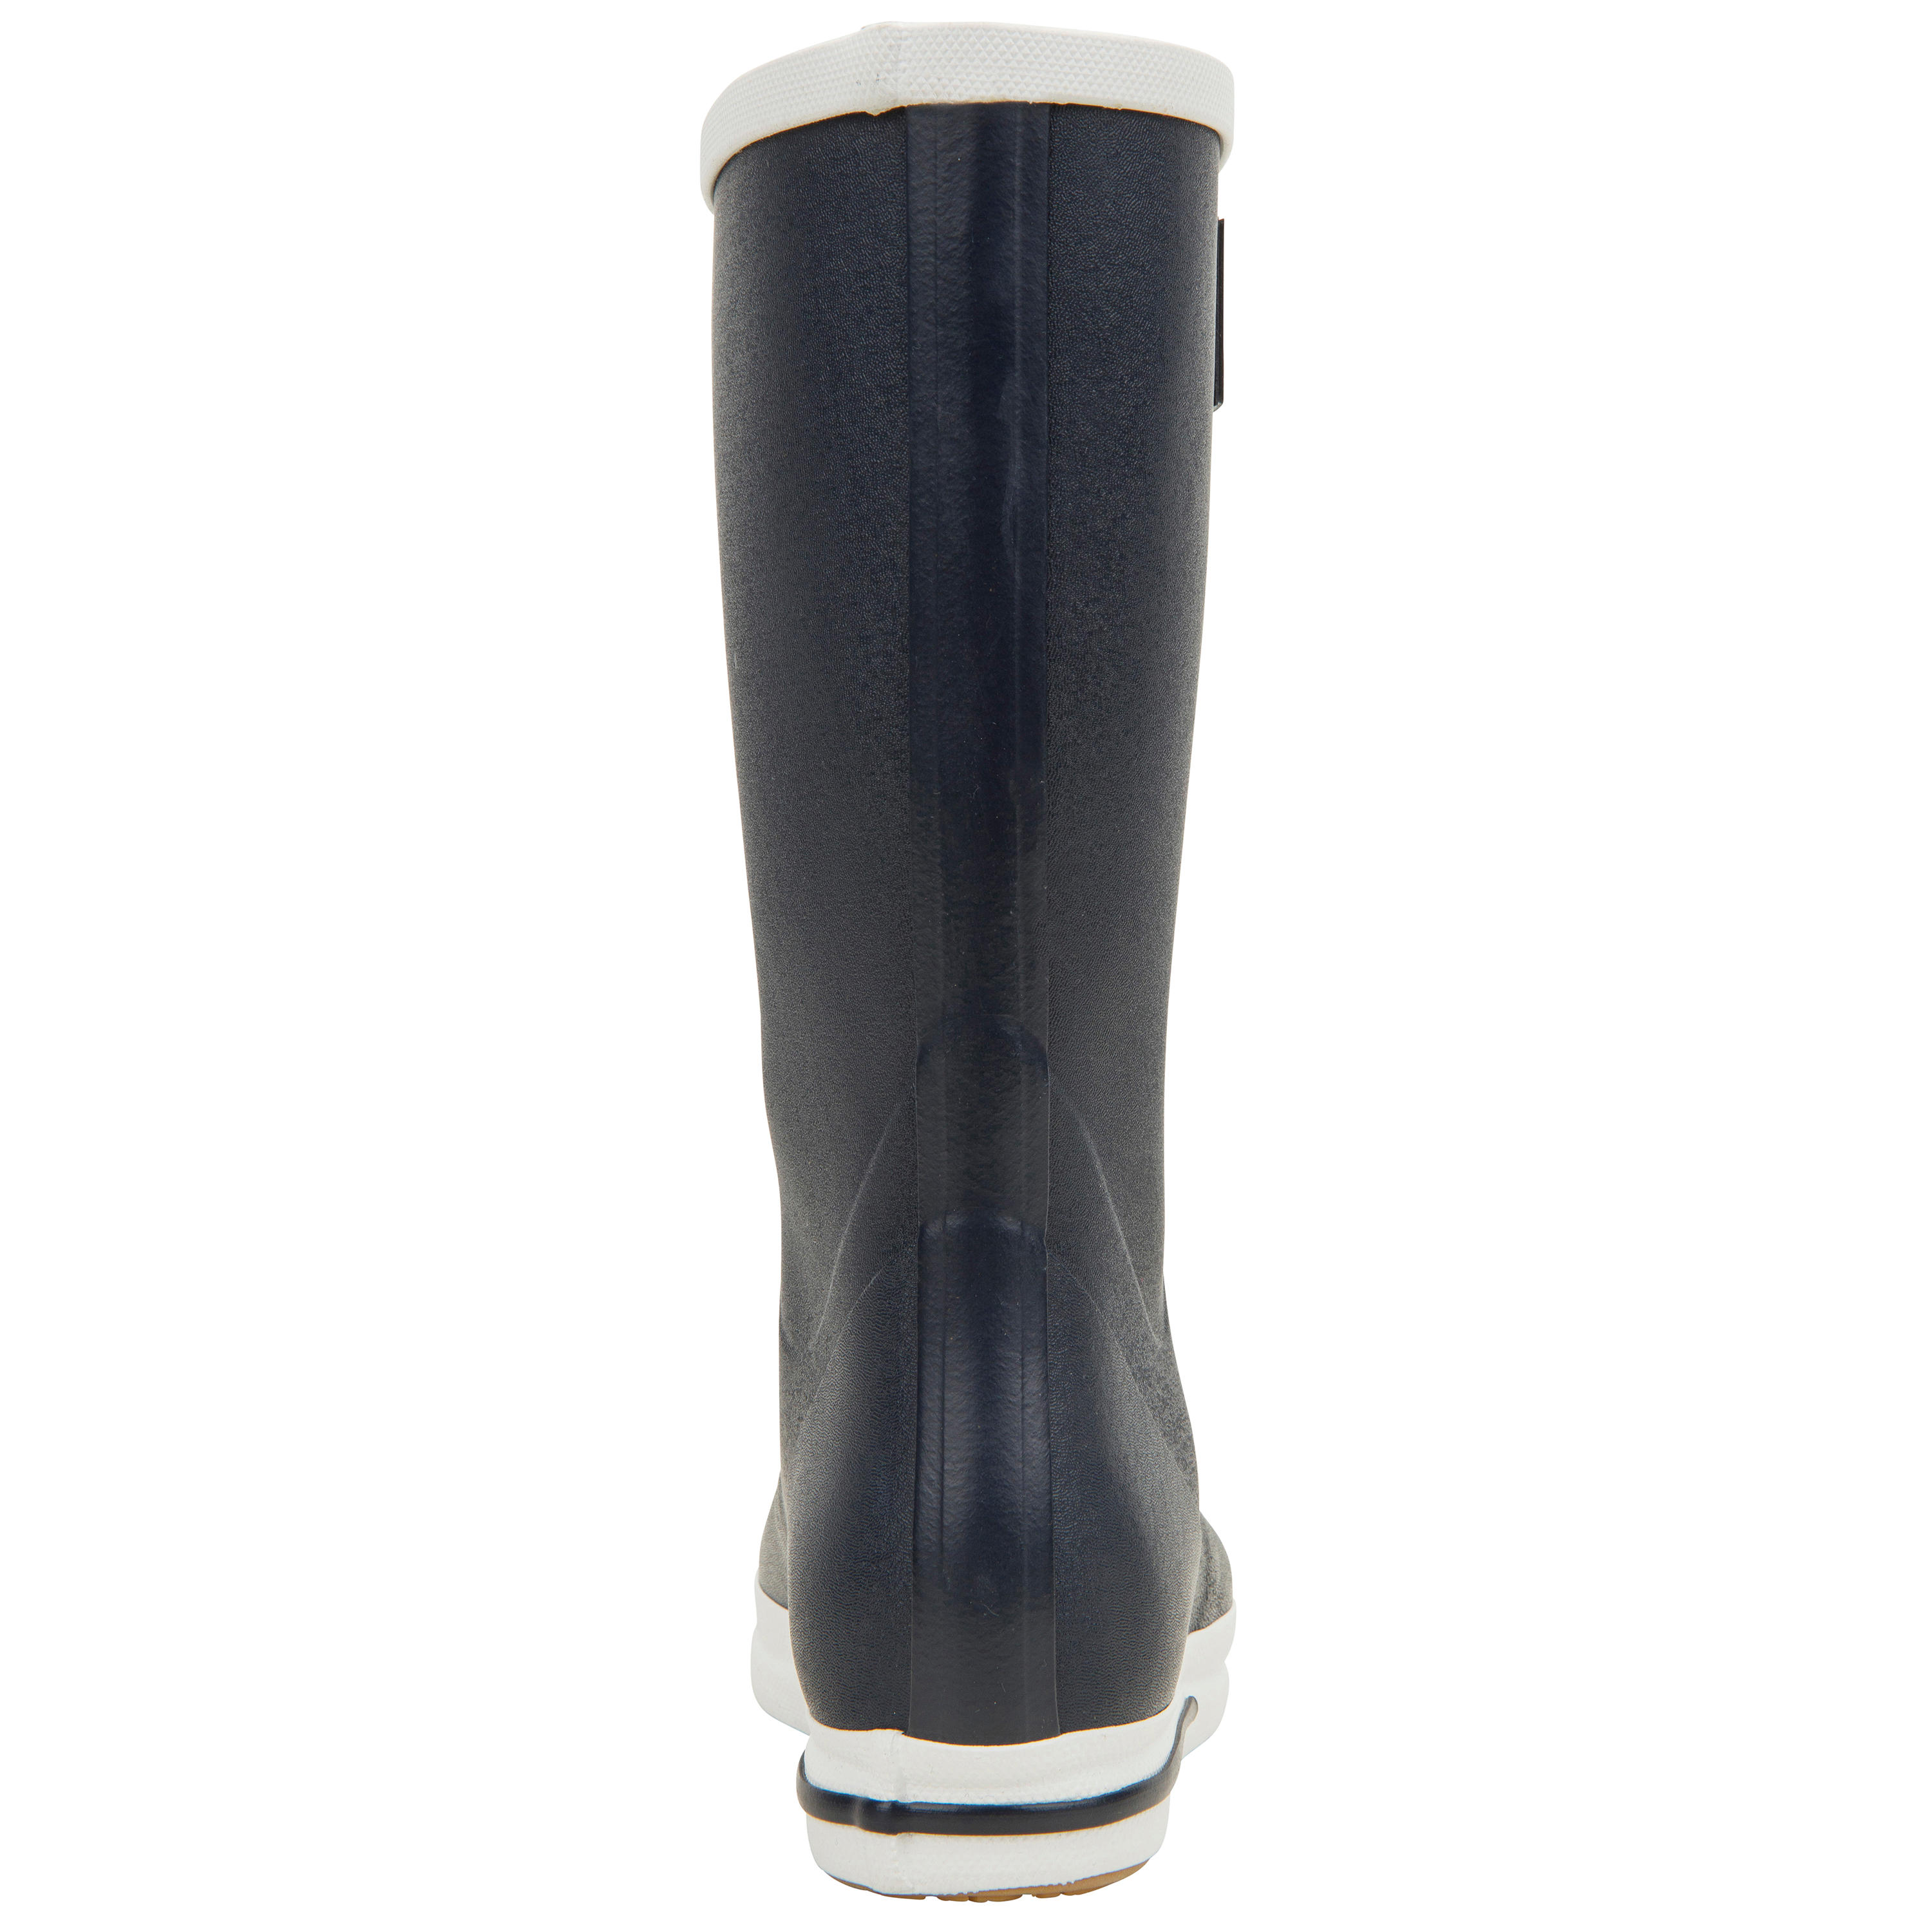 Sailing boots, rubber rain boots - 500 Adults' Navy 10/11